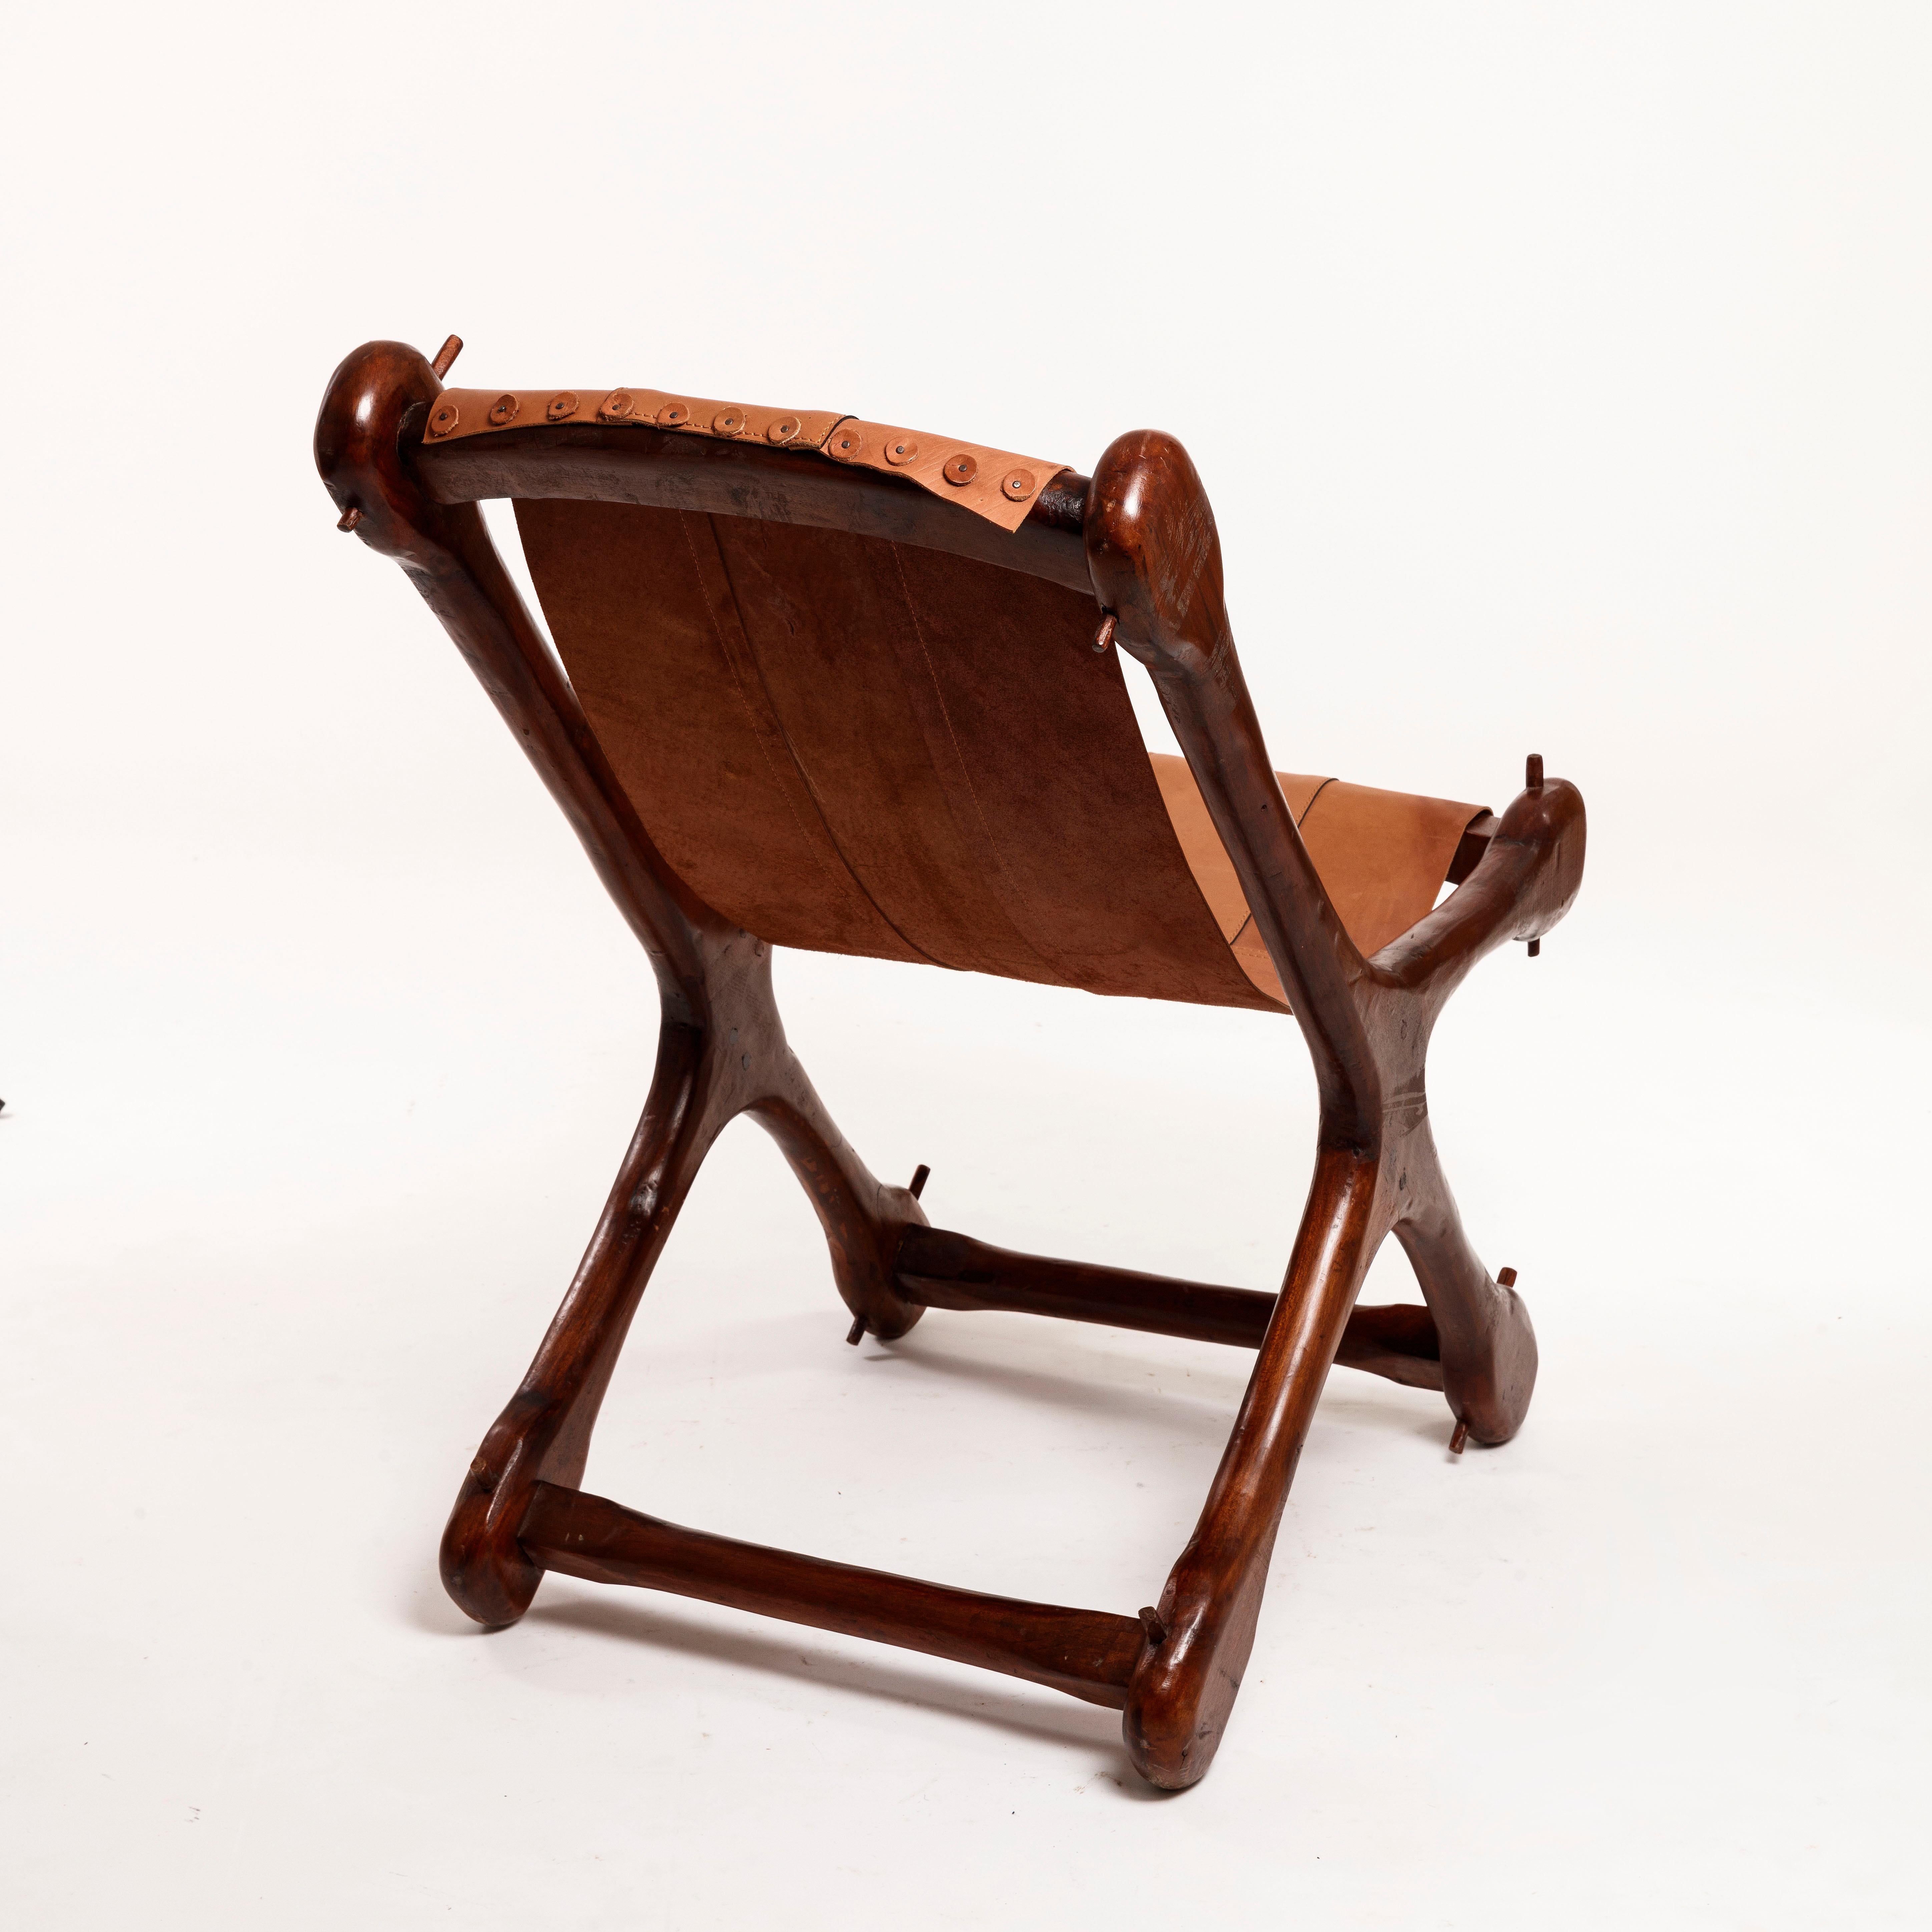 Mid-20th Century Don Shoemaker Sling Sloucher Chairs Señal, Sculptural and Organic, Mexico For Sale